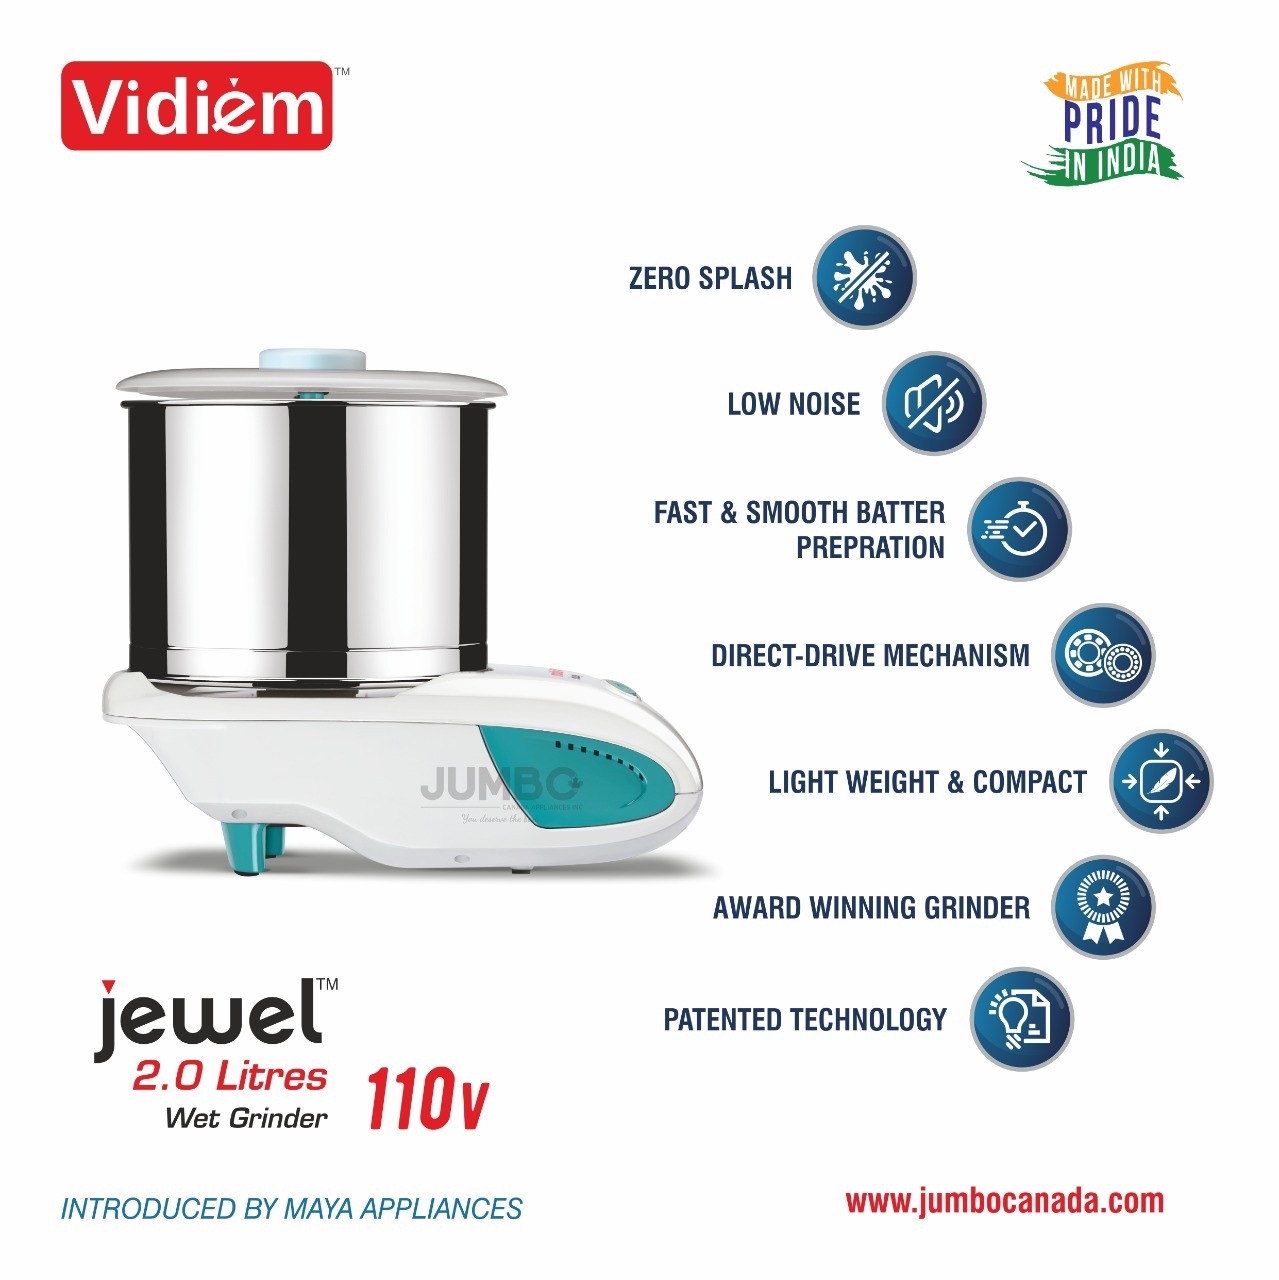 vidiem-jewel-st-2-liter-wet-grinder-stainless-steel-drum-stone-rollers-110-v-with-its-motor-rpm-1440-and-drum-rpm-1502